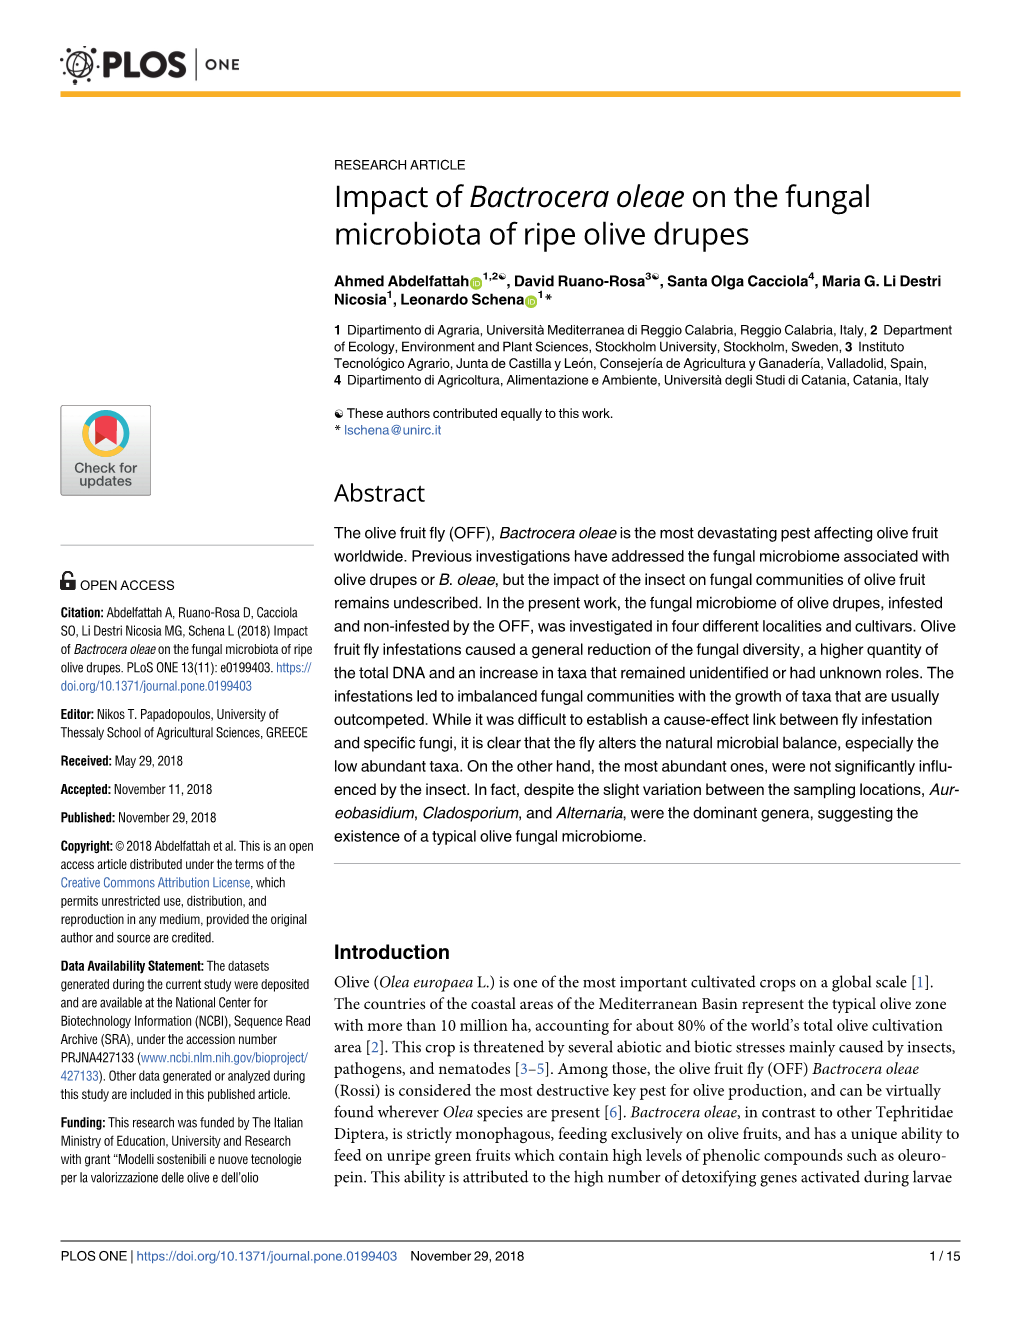 Impact of Bactrocera Oleae on the Fungal Microbiota of Ripe Olive Drupes